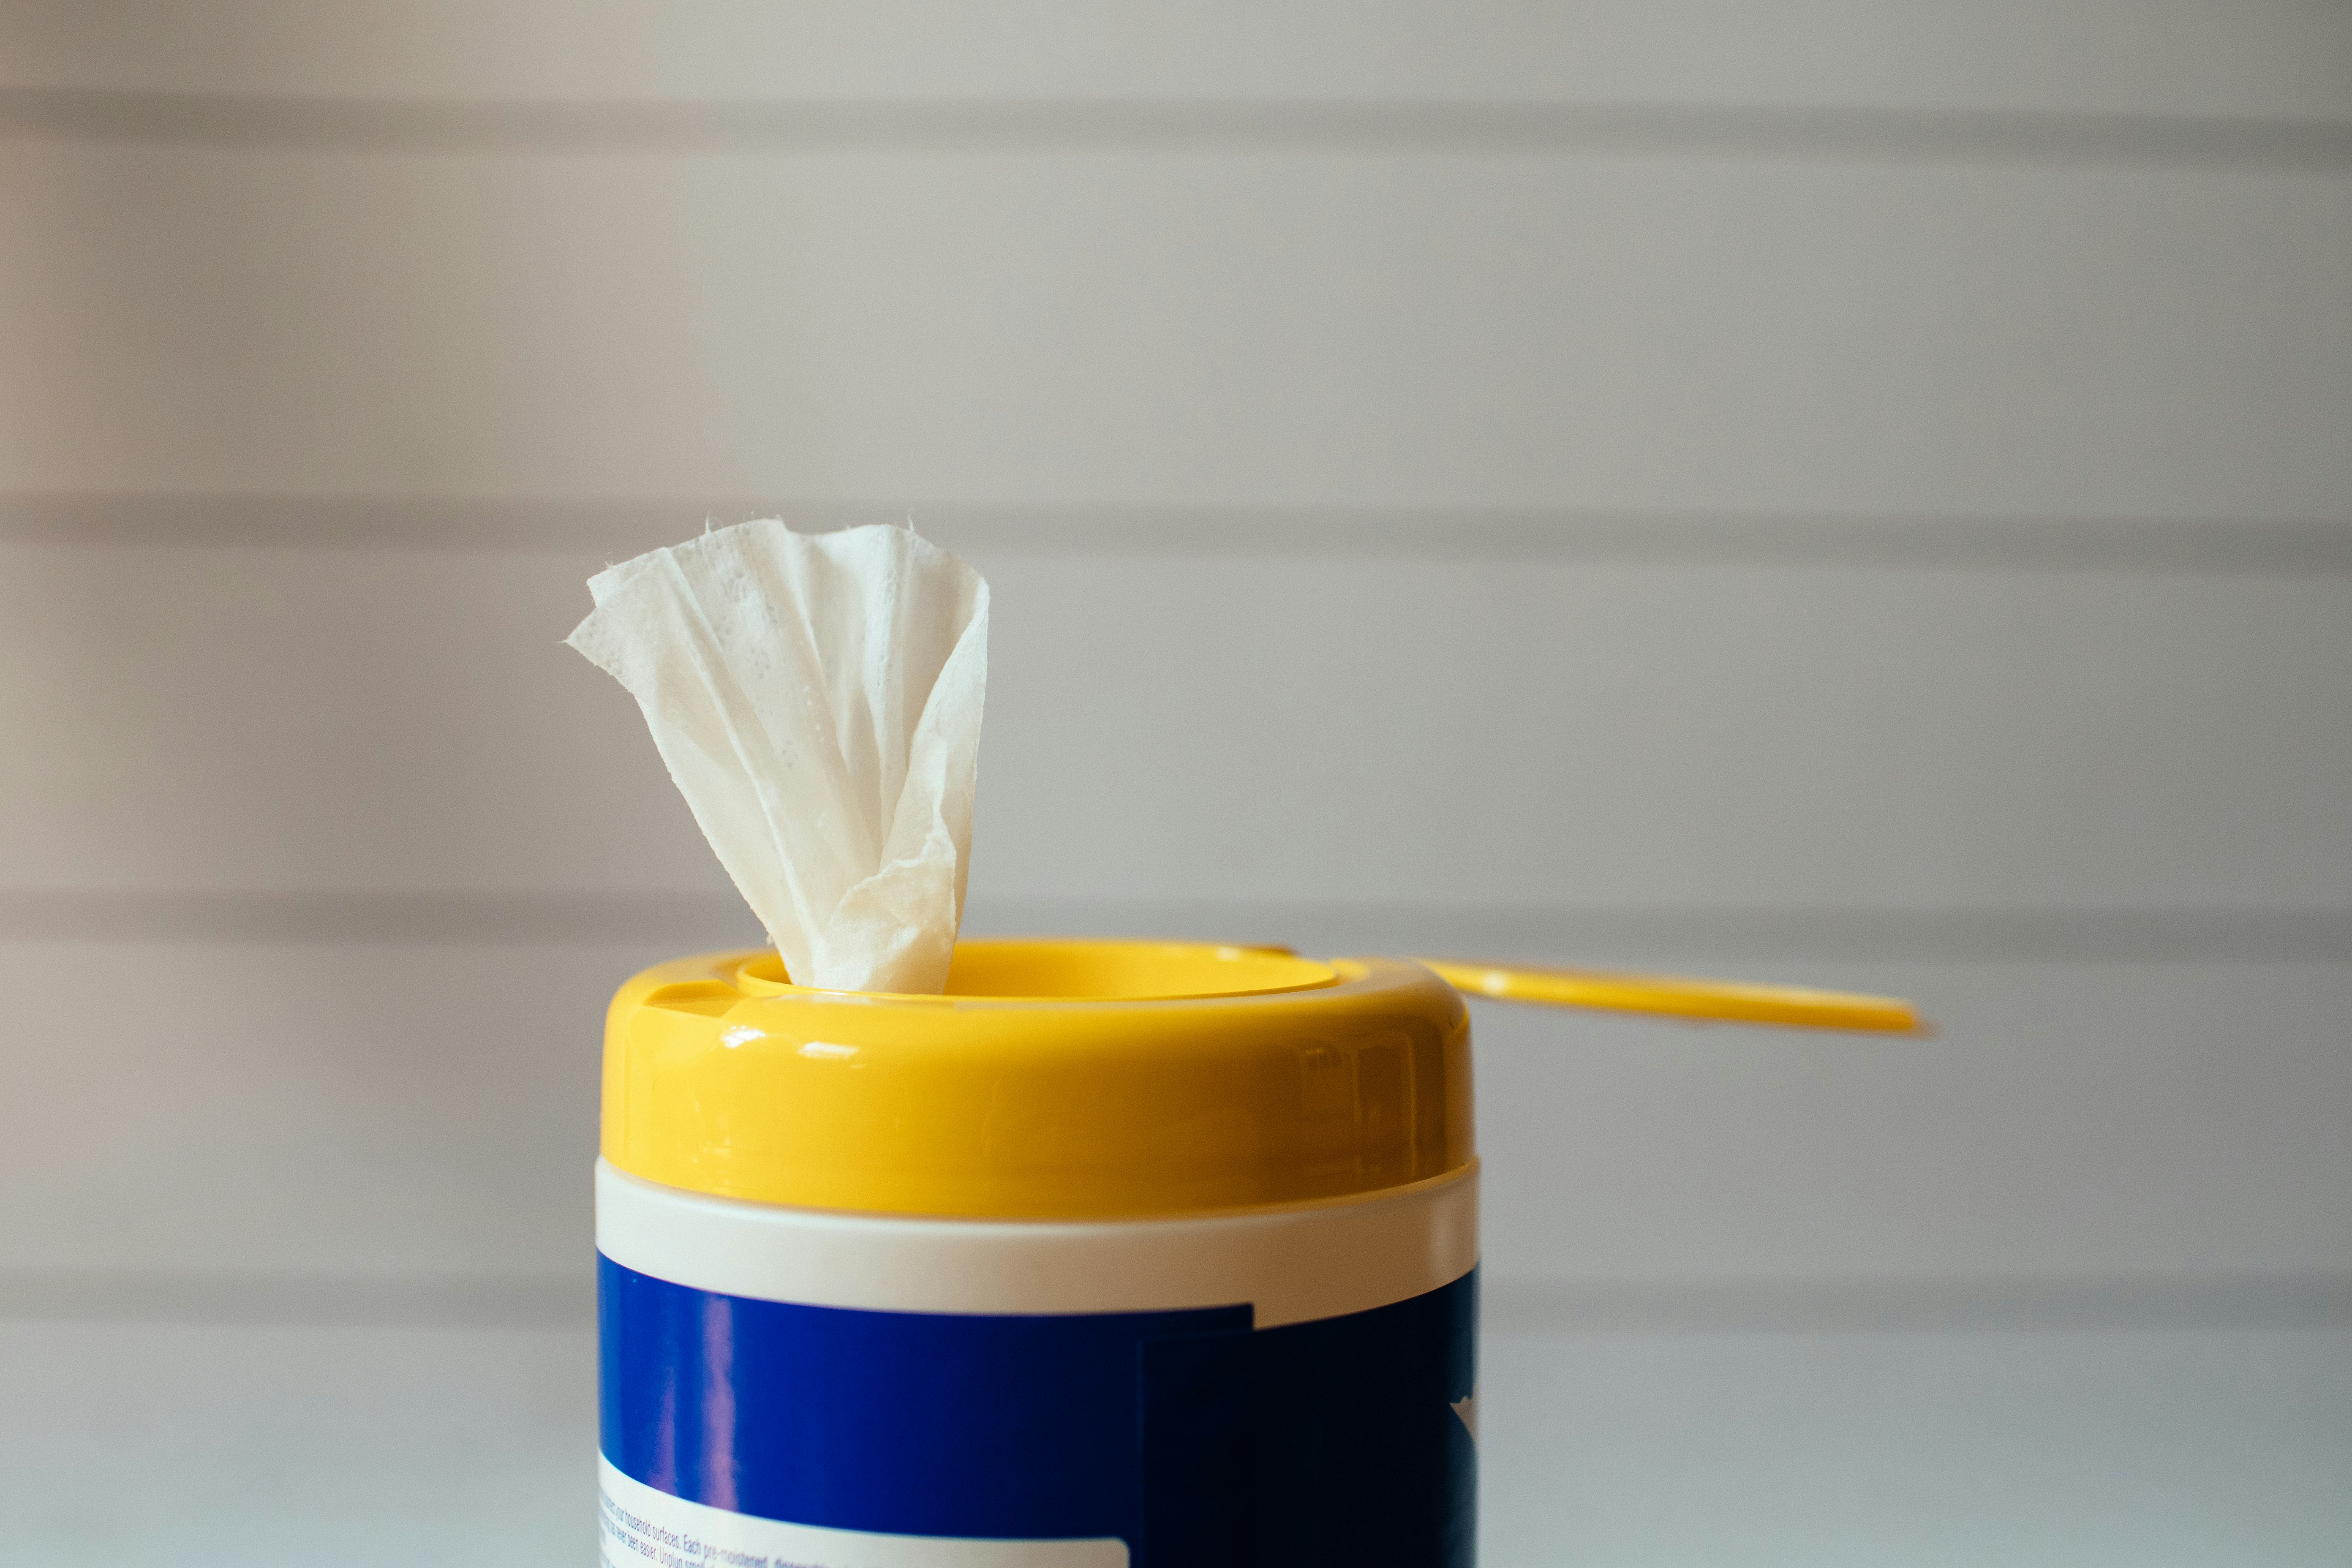 yellow pencil on white and blue plastic container